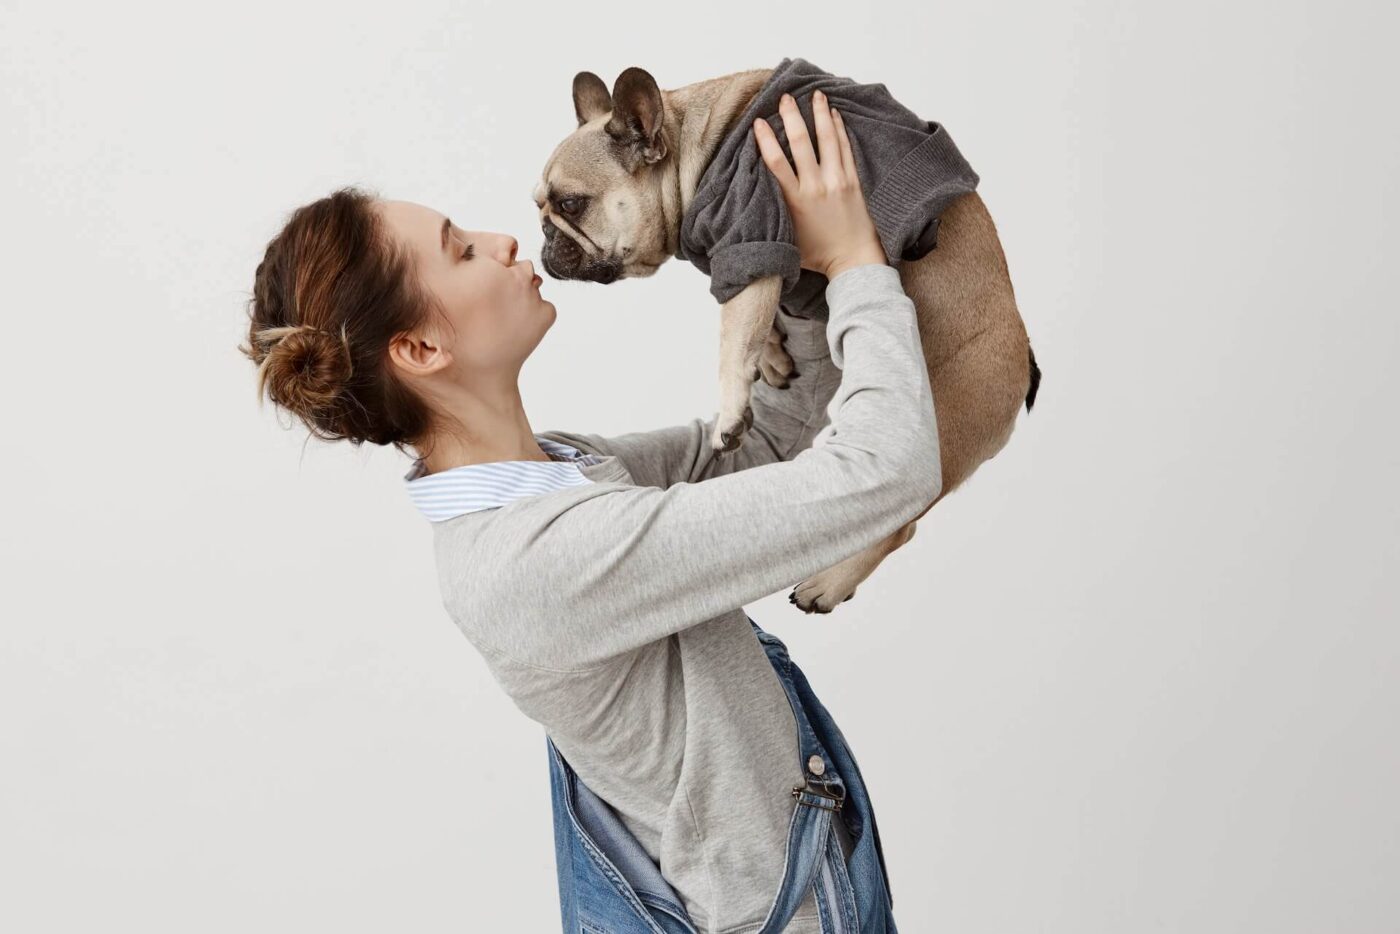 Woman lifting and kissing her dog